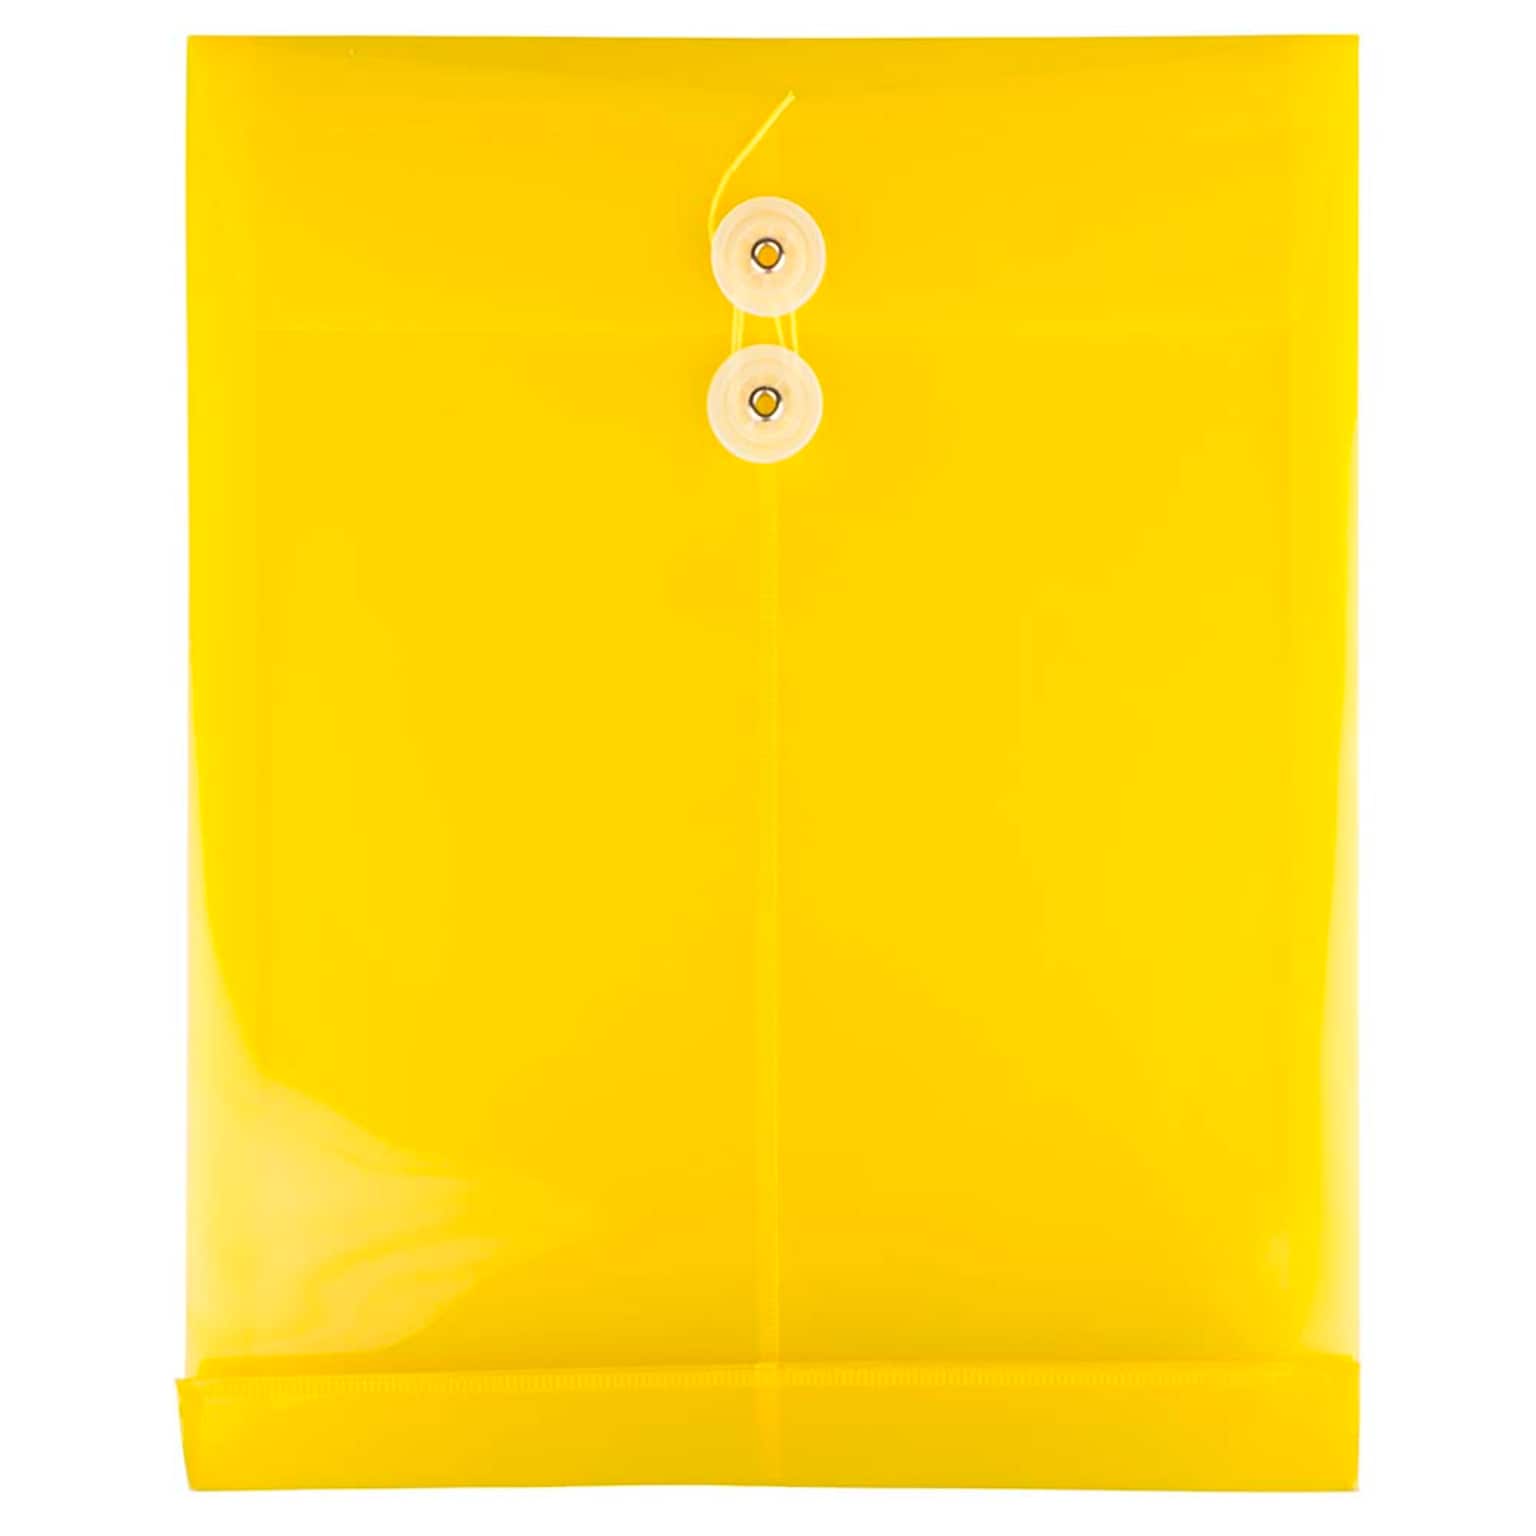 JAM Paper® Plastic Envelopes with Button and String Tie Closure, Letter Open End, 9.75 x 11.75, Yellow Poly, 12/pack (118B1YE)